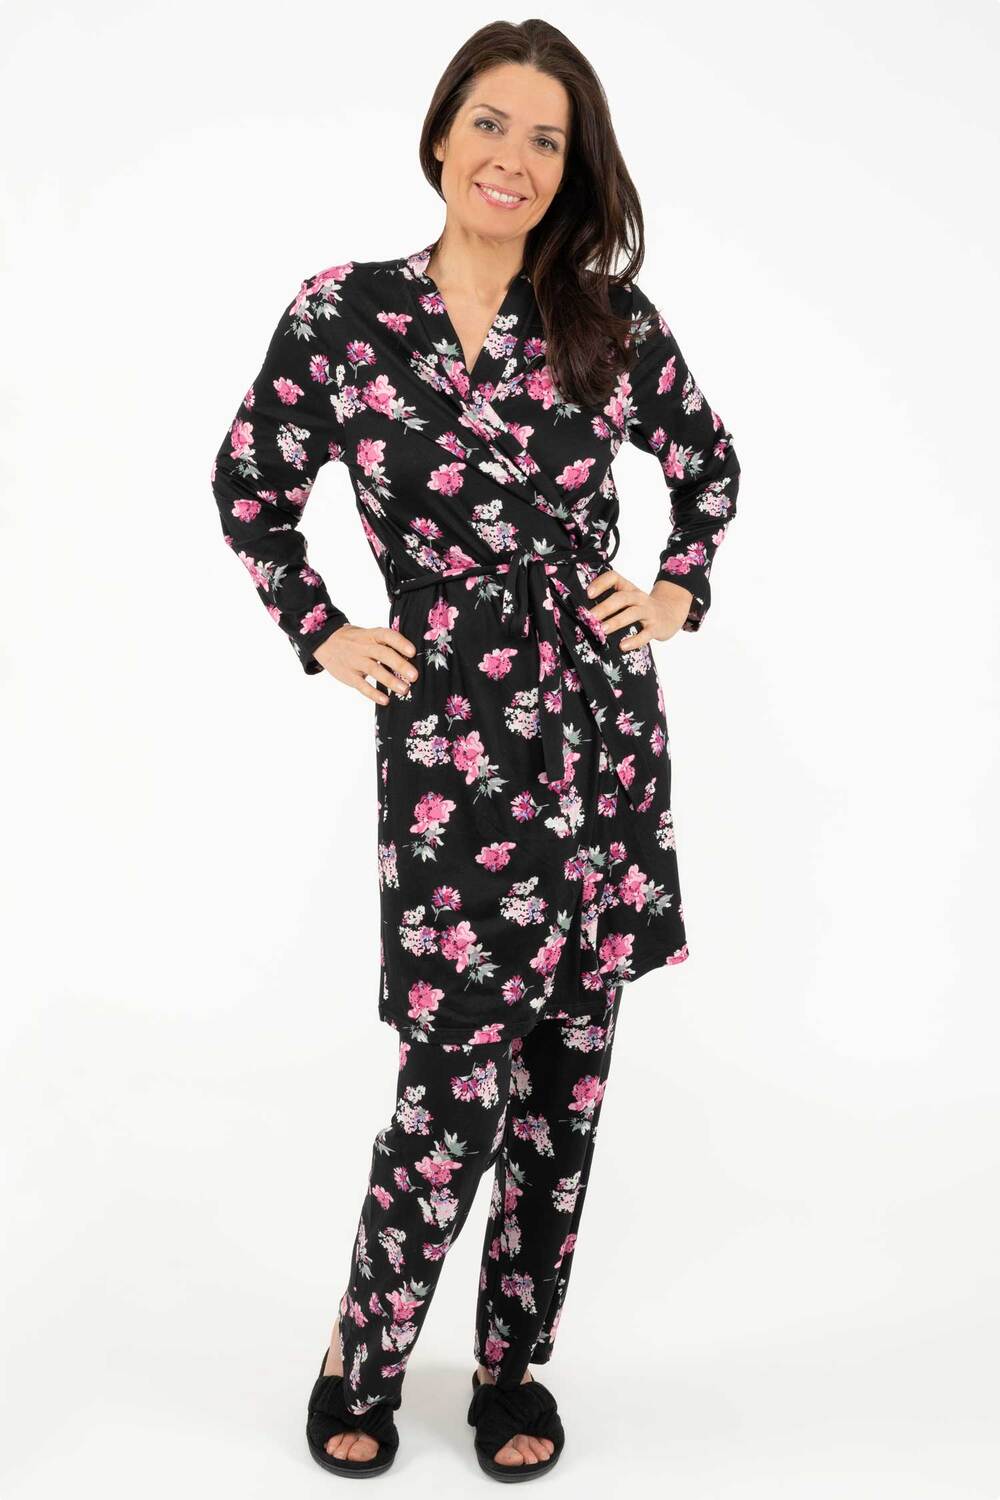 Charmour - Soft touch short robe - Blossom dreams